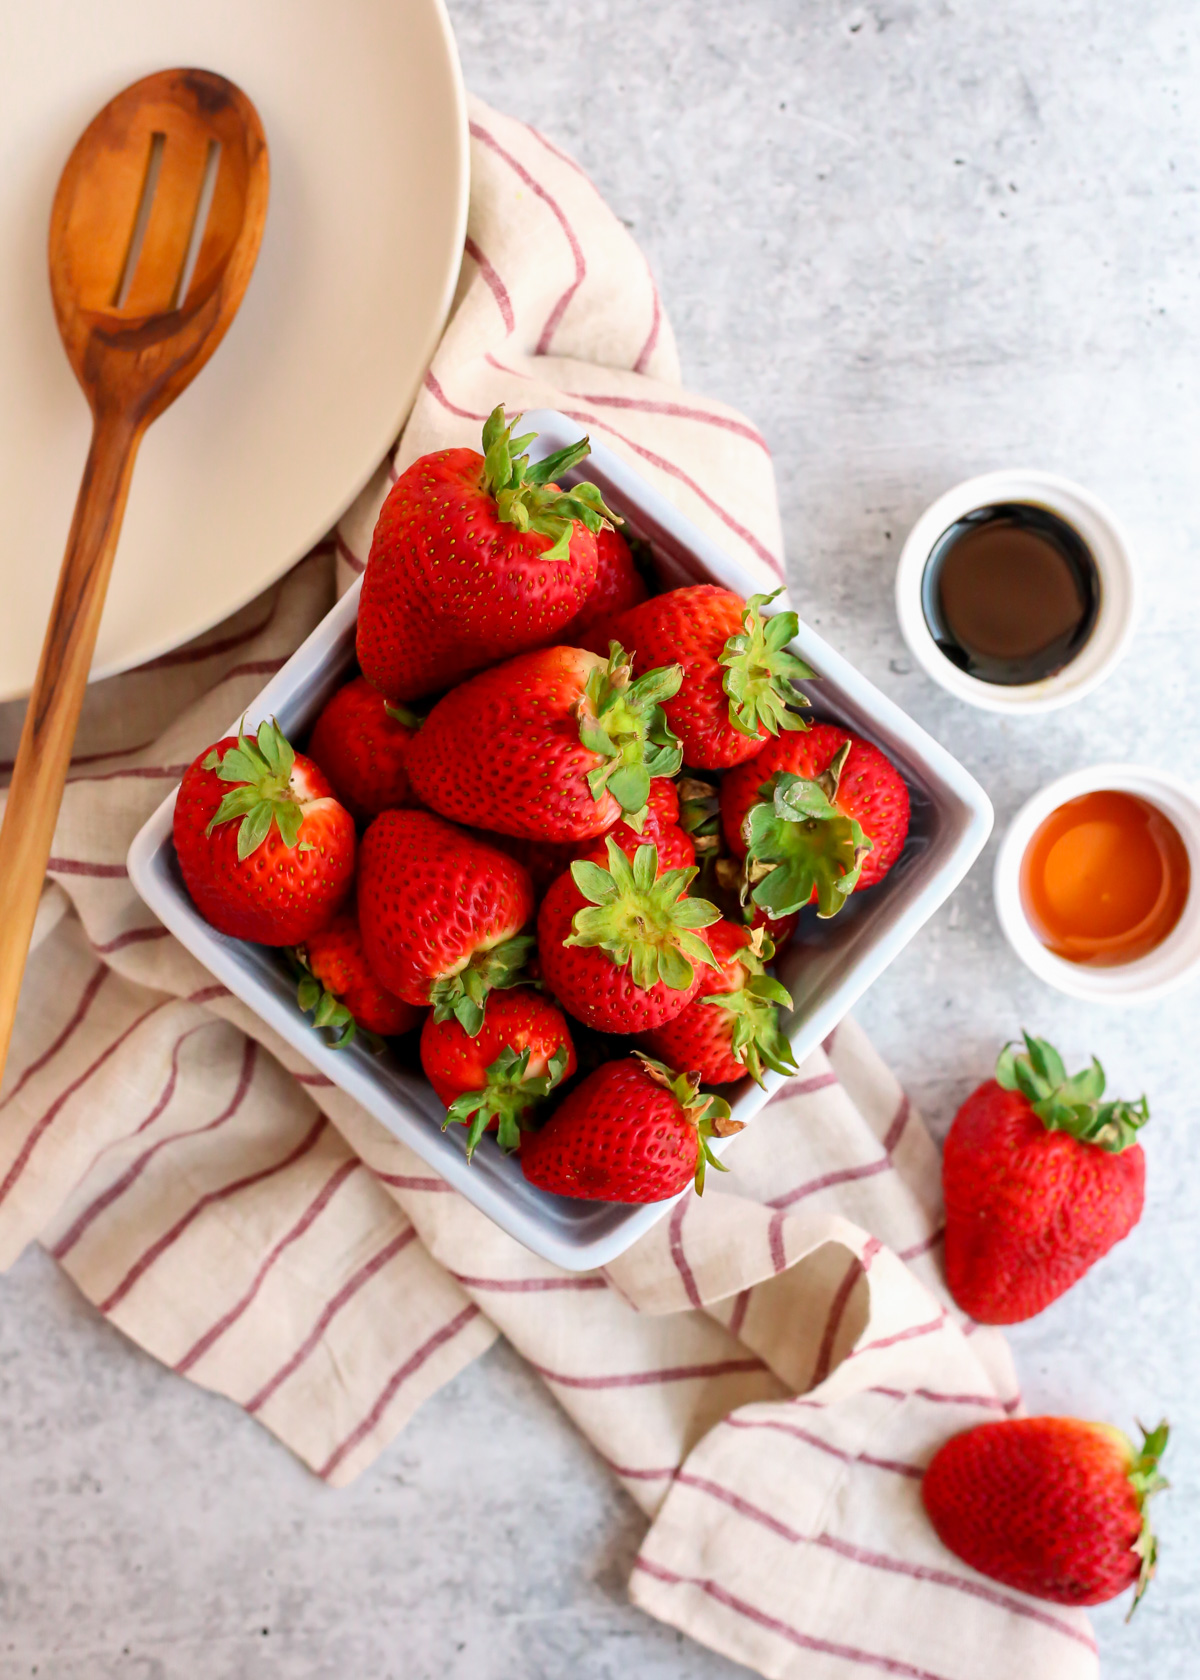 Flatlay style image of the ingredients needed to make balsamic macerated strawberries, including fresh strawberries, balsamic vinegar, and honey